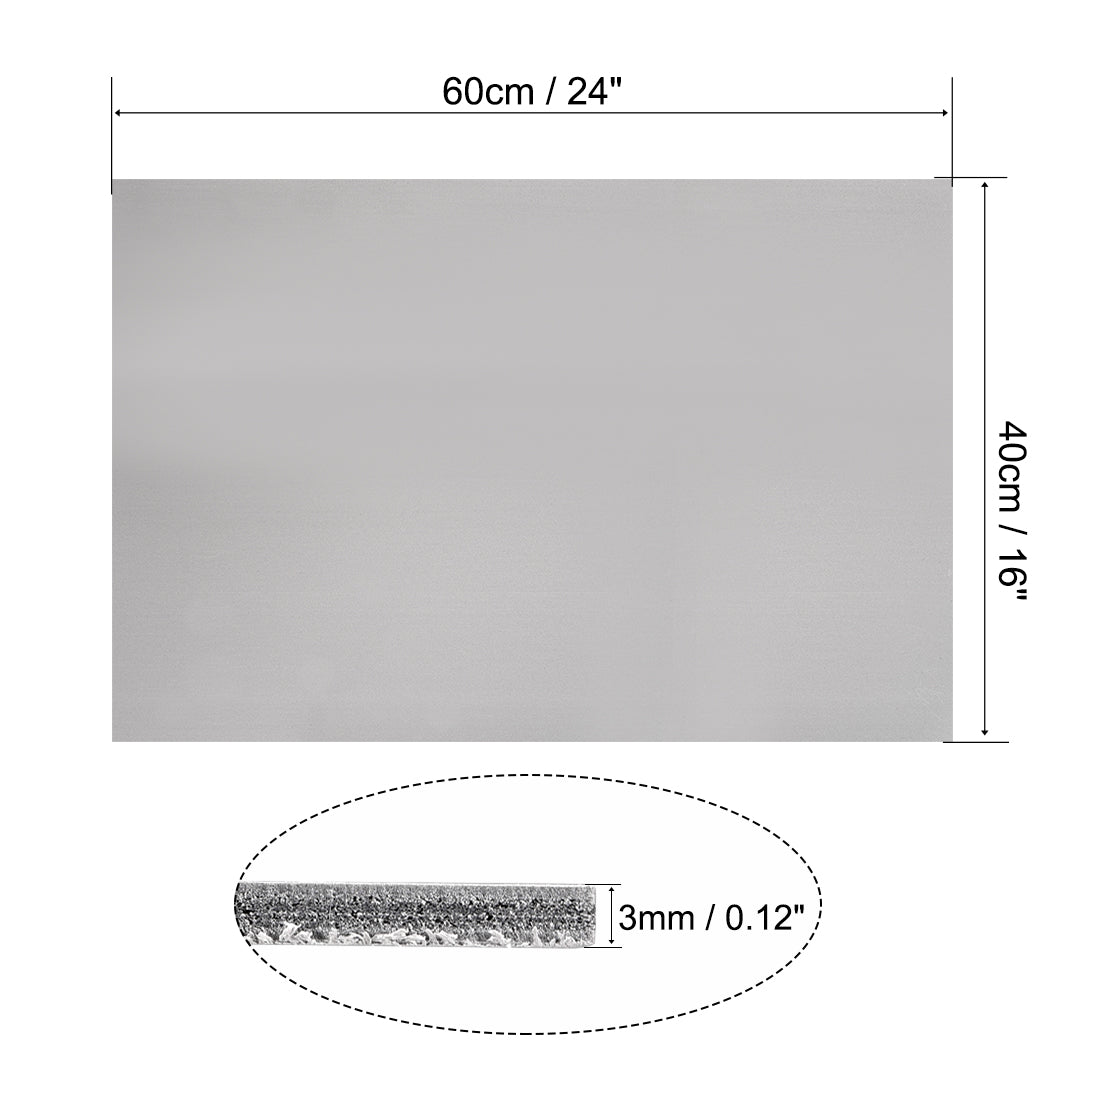 Uxcell Uxcell PVC Foam Board Sheet,3mm T x 16"W x 24“L,Gray,Double Sided,Expanded PVC Sheet,for	Presentations,Signboards,	Artsand	Crafts,Framing,Display